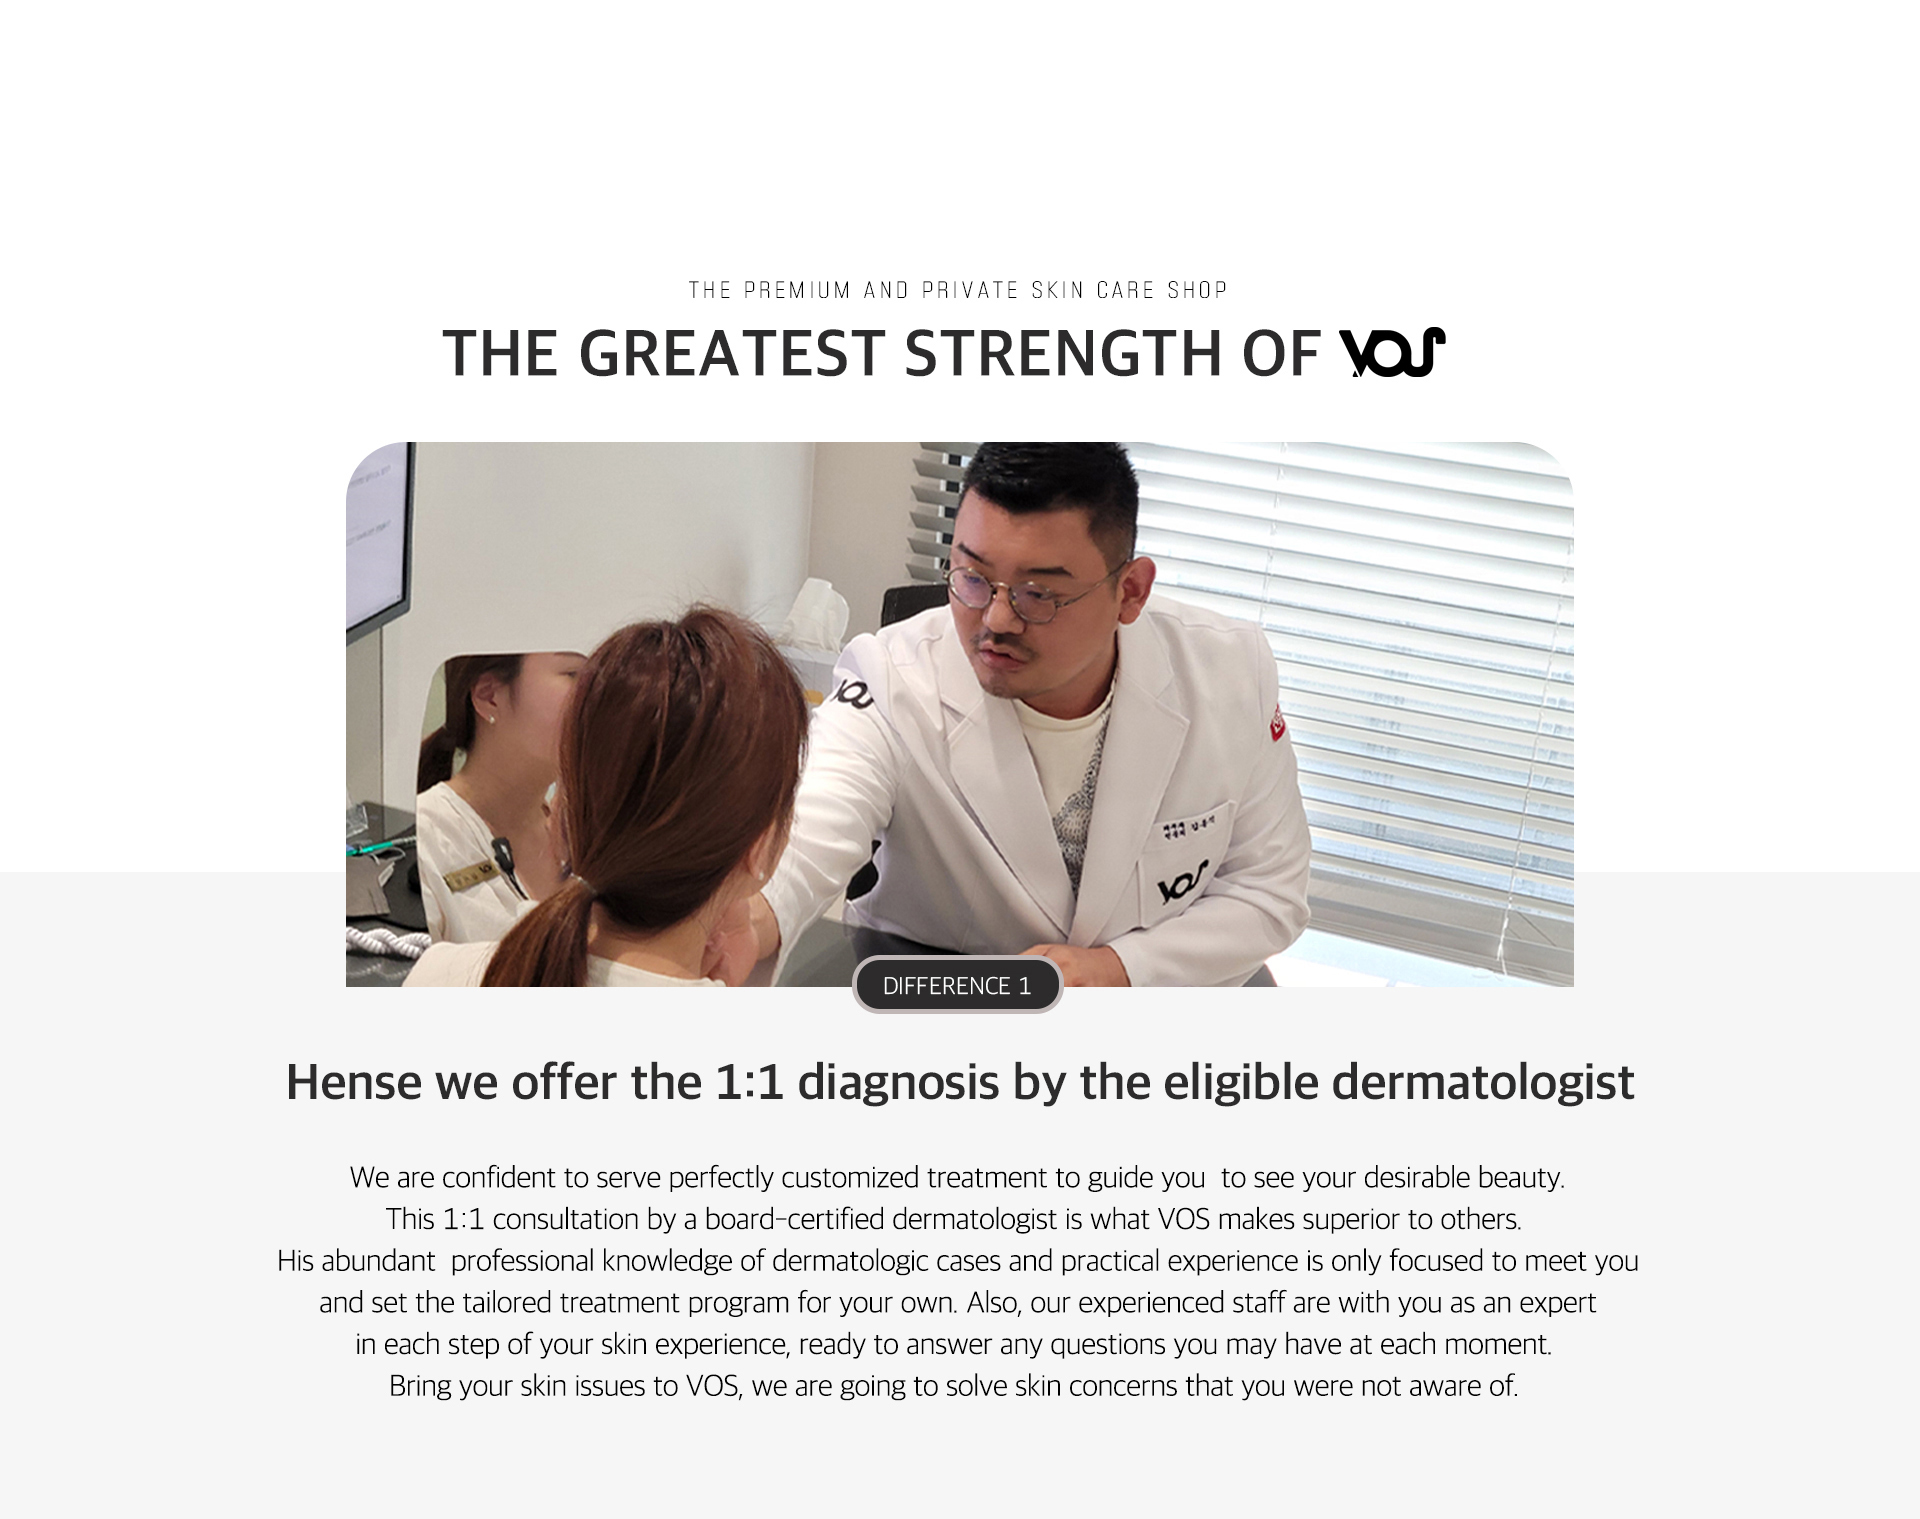 THE GREATEST STRENGTH OF VOS. [DIFFERENCE 1] Hense we offer the 1:1 diagnosis by the eligible dermatologist